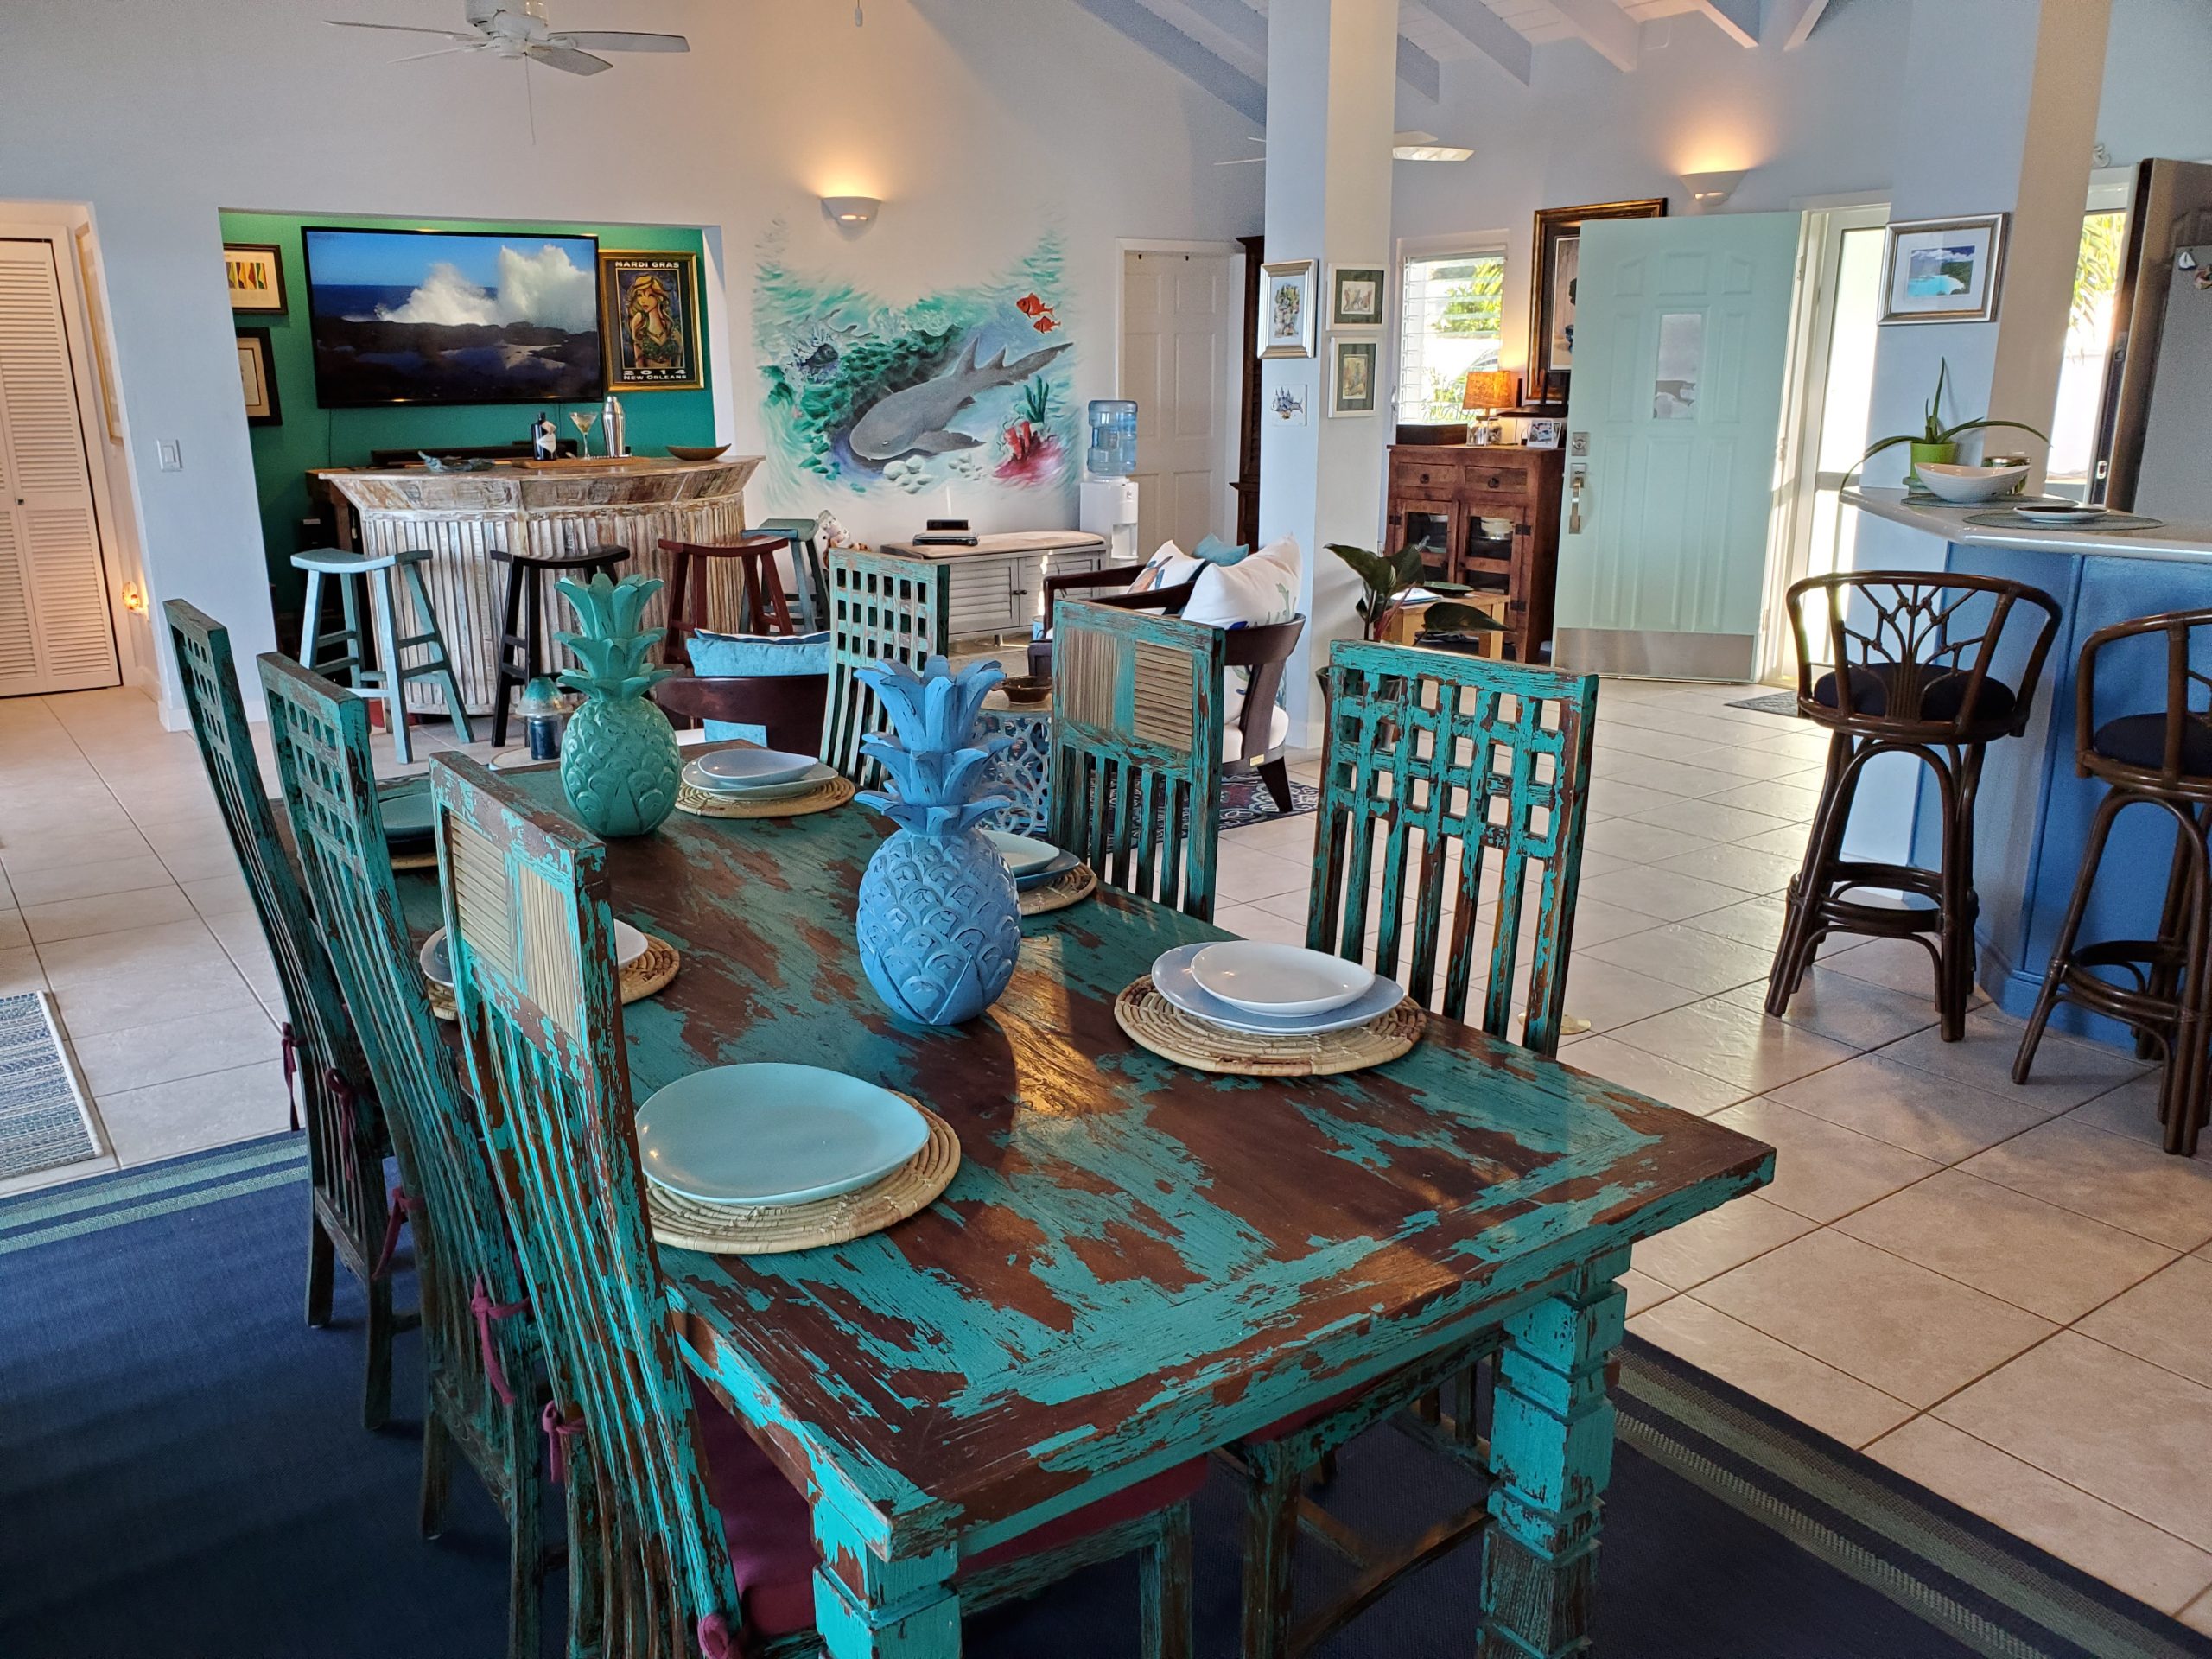 After closing on the property in March 2019, the new innkeepers called upon family members and friends to help transform the eclectic building into a boutique bed and breakfast. Less than a year later, Julie and Adams were ready to welcome guests to the intimate three-bedroom lodging, complete with seaside views, a private chef (Adams), and daily mimosa specials, crafted by Julie. 